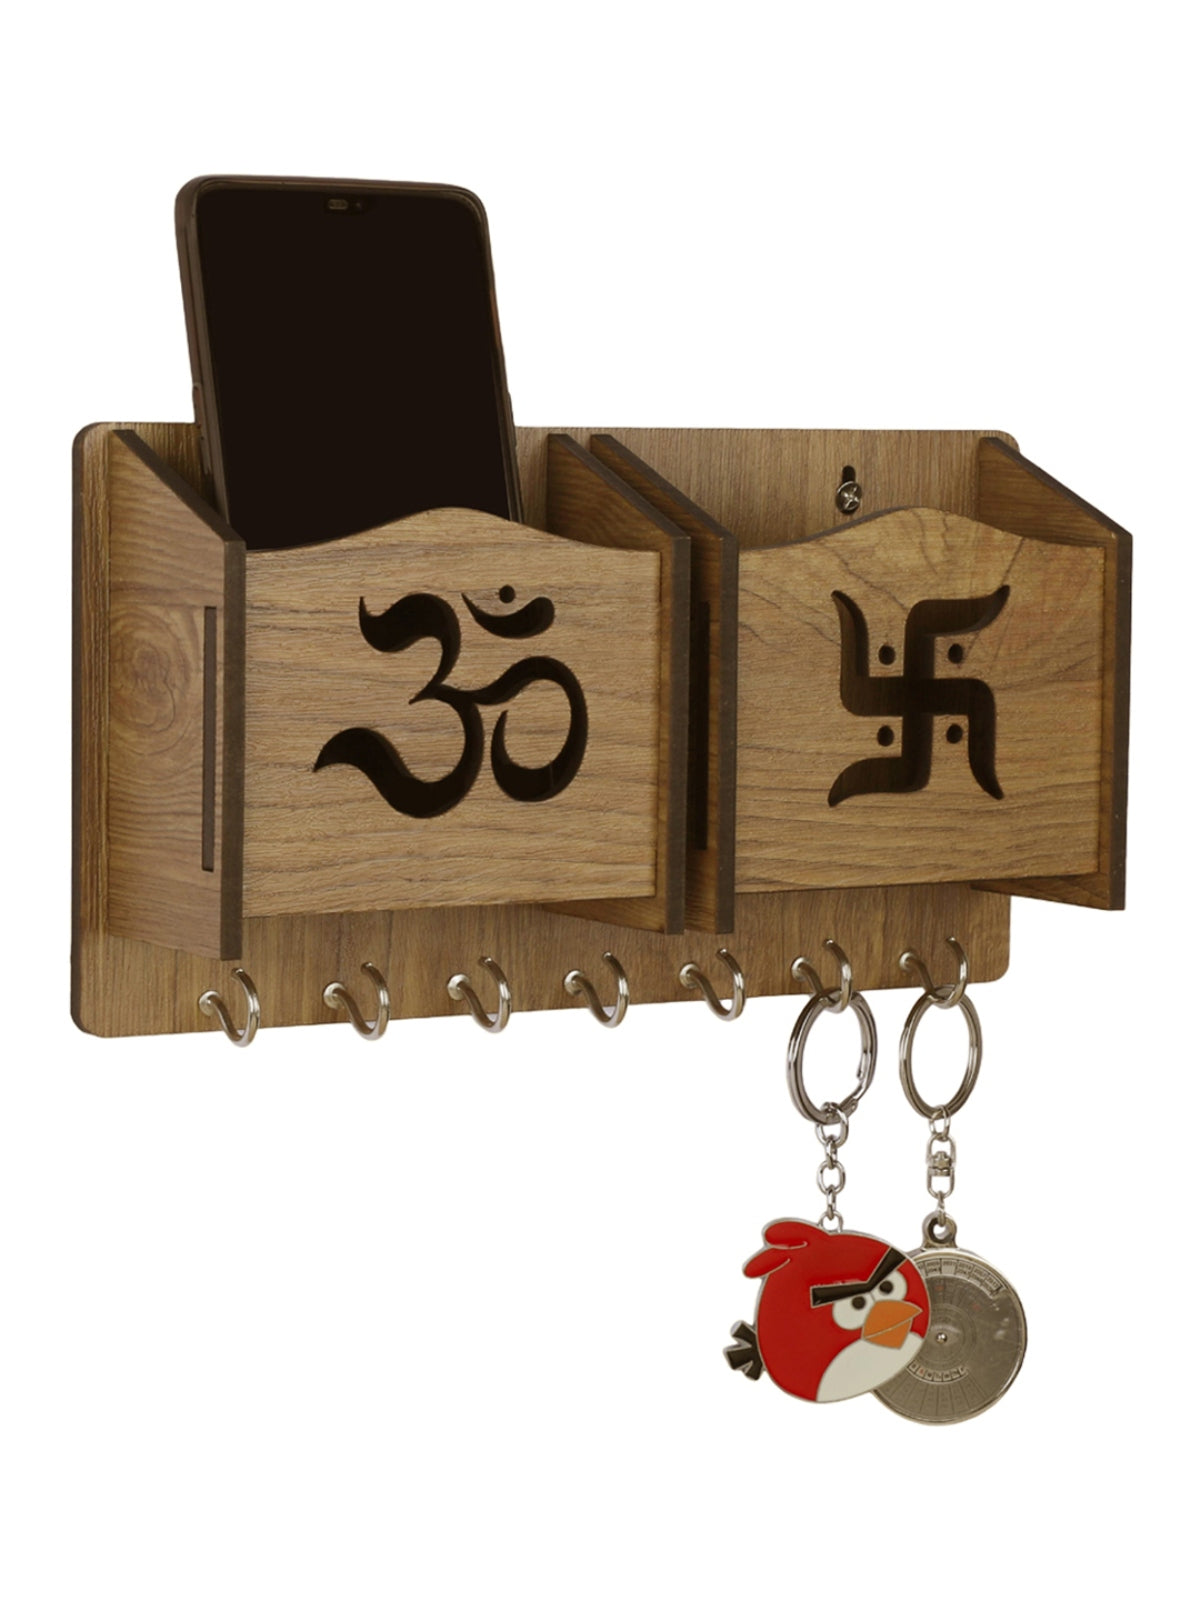 Wooden Key Holder With 2 Mobile Stand Holder For Home & Office Wall Decorative